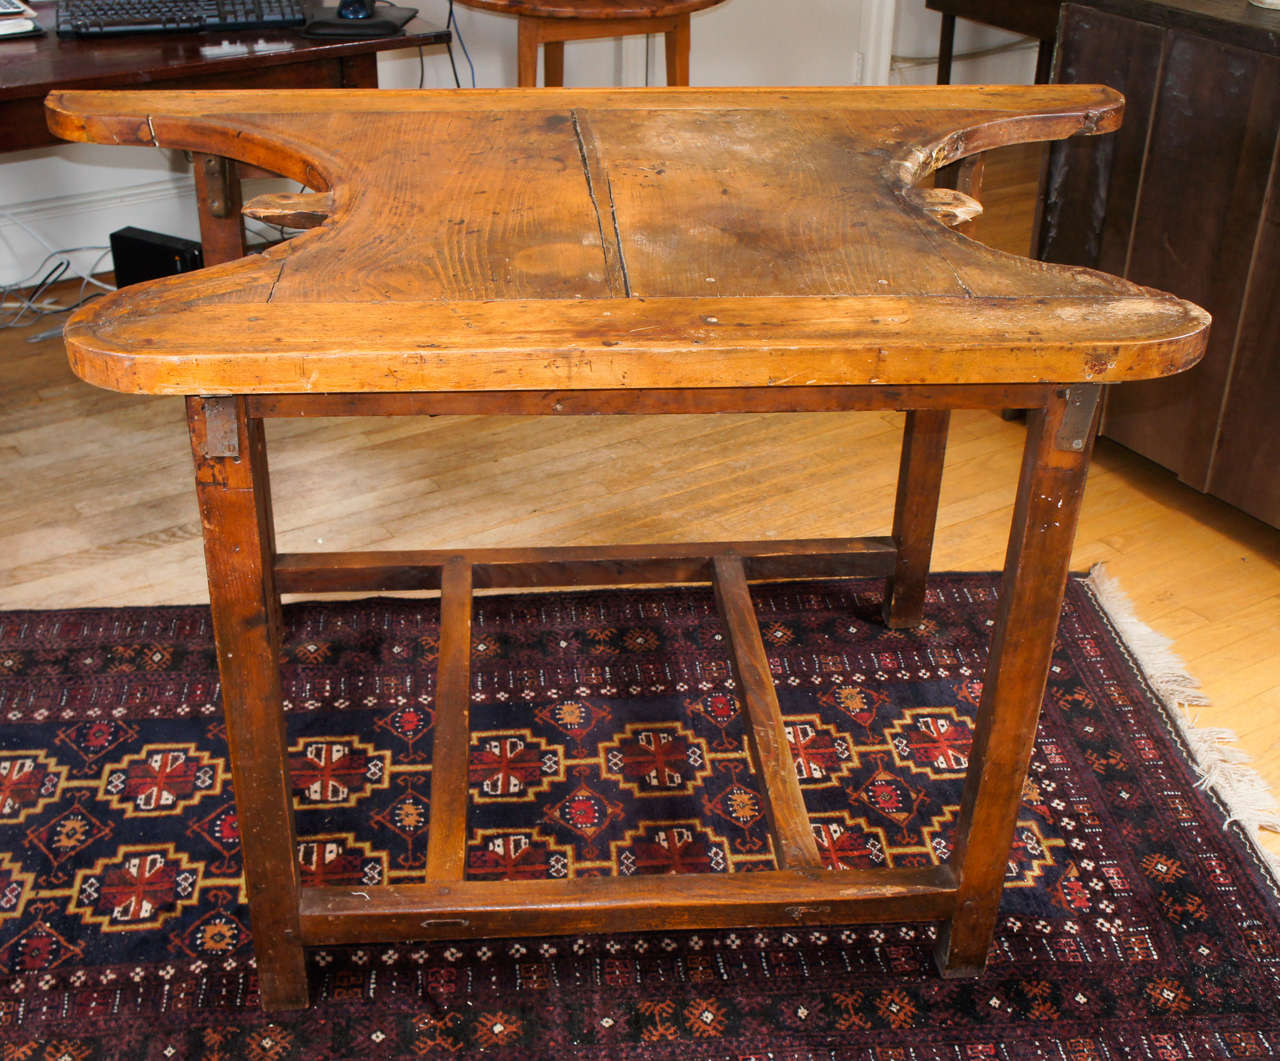 Okay, here it is!!! The most unusual, fun but functional, conversation piece of this container. You tell how much we love this piece BEFORE we describe it!! This 1870 English watchmakers table has two curved work areas at either end. Each work